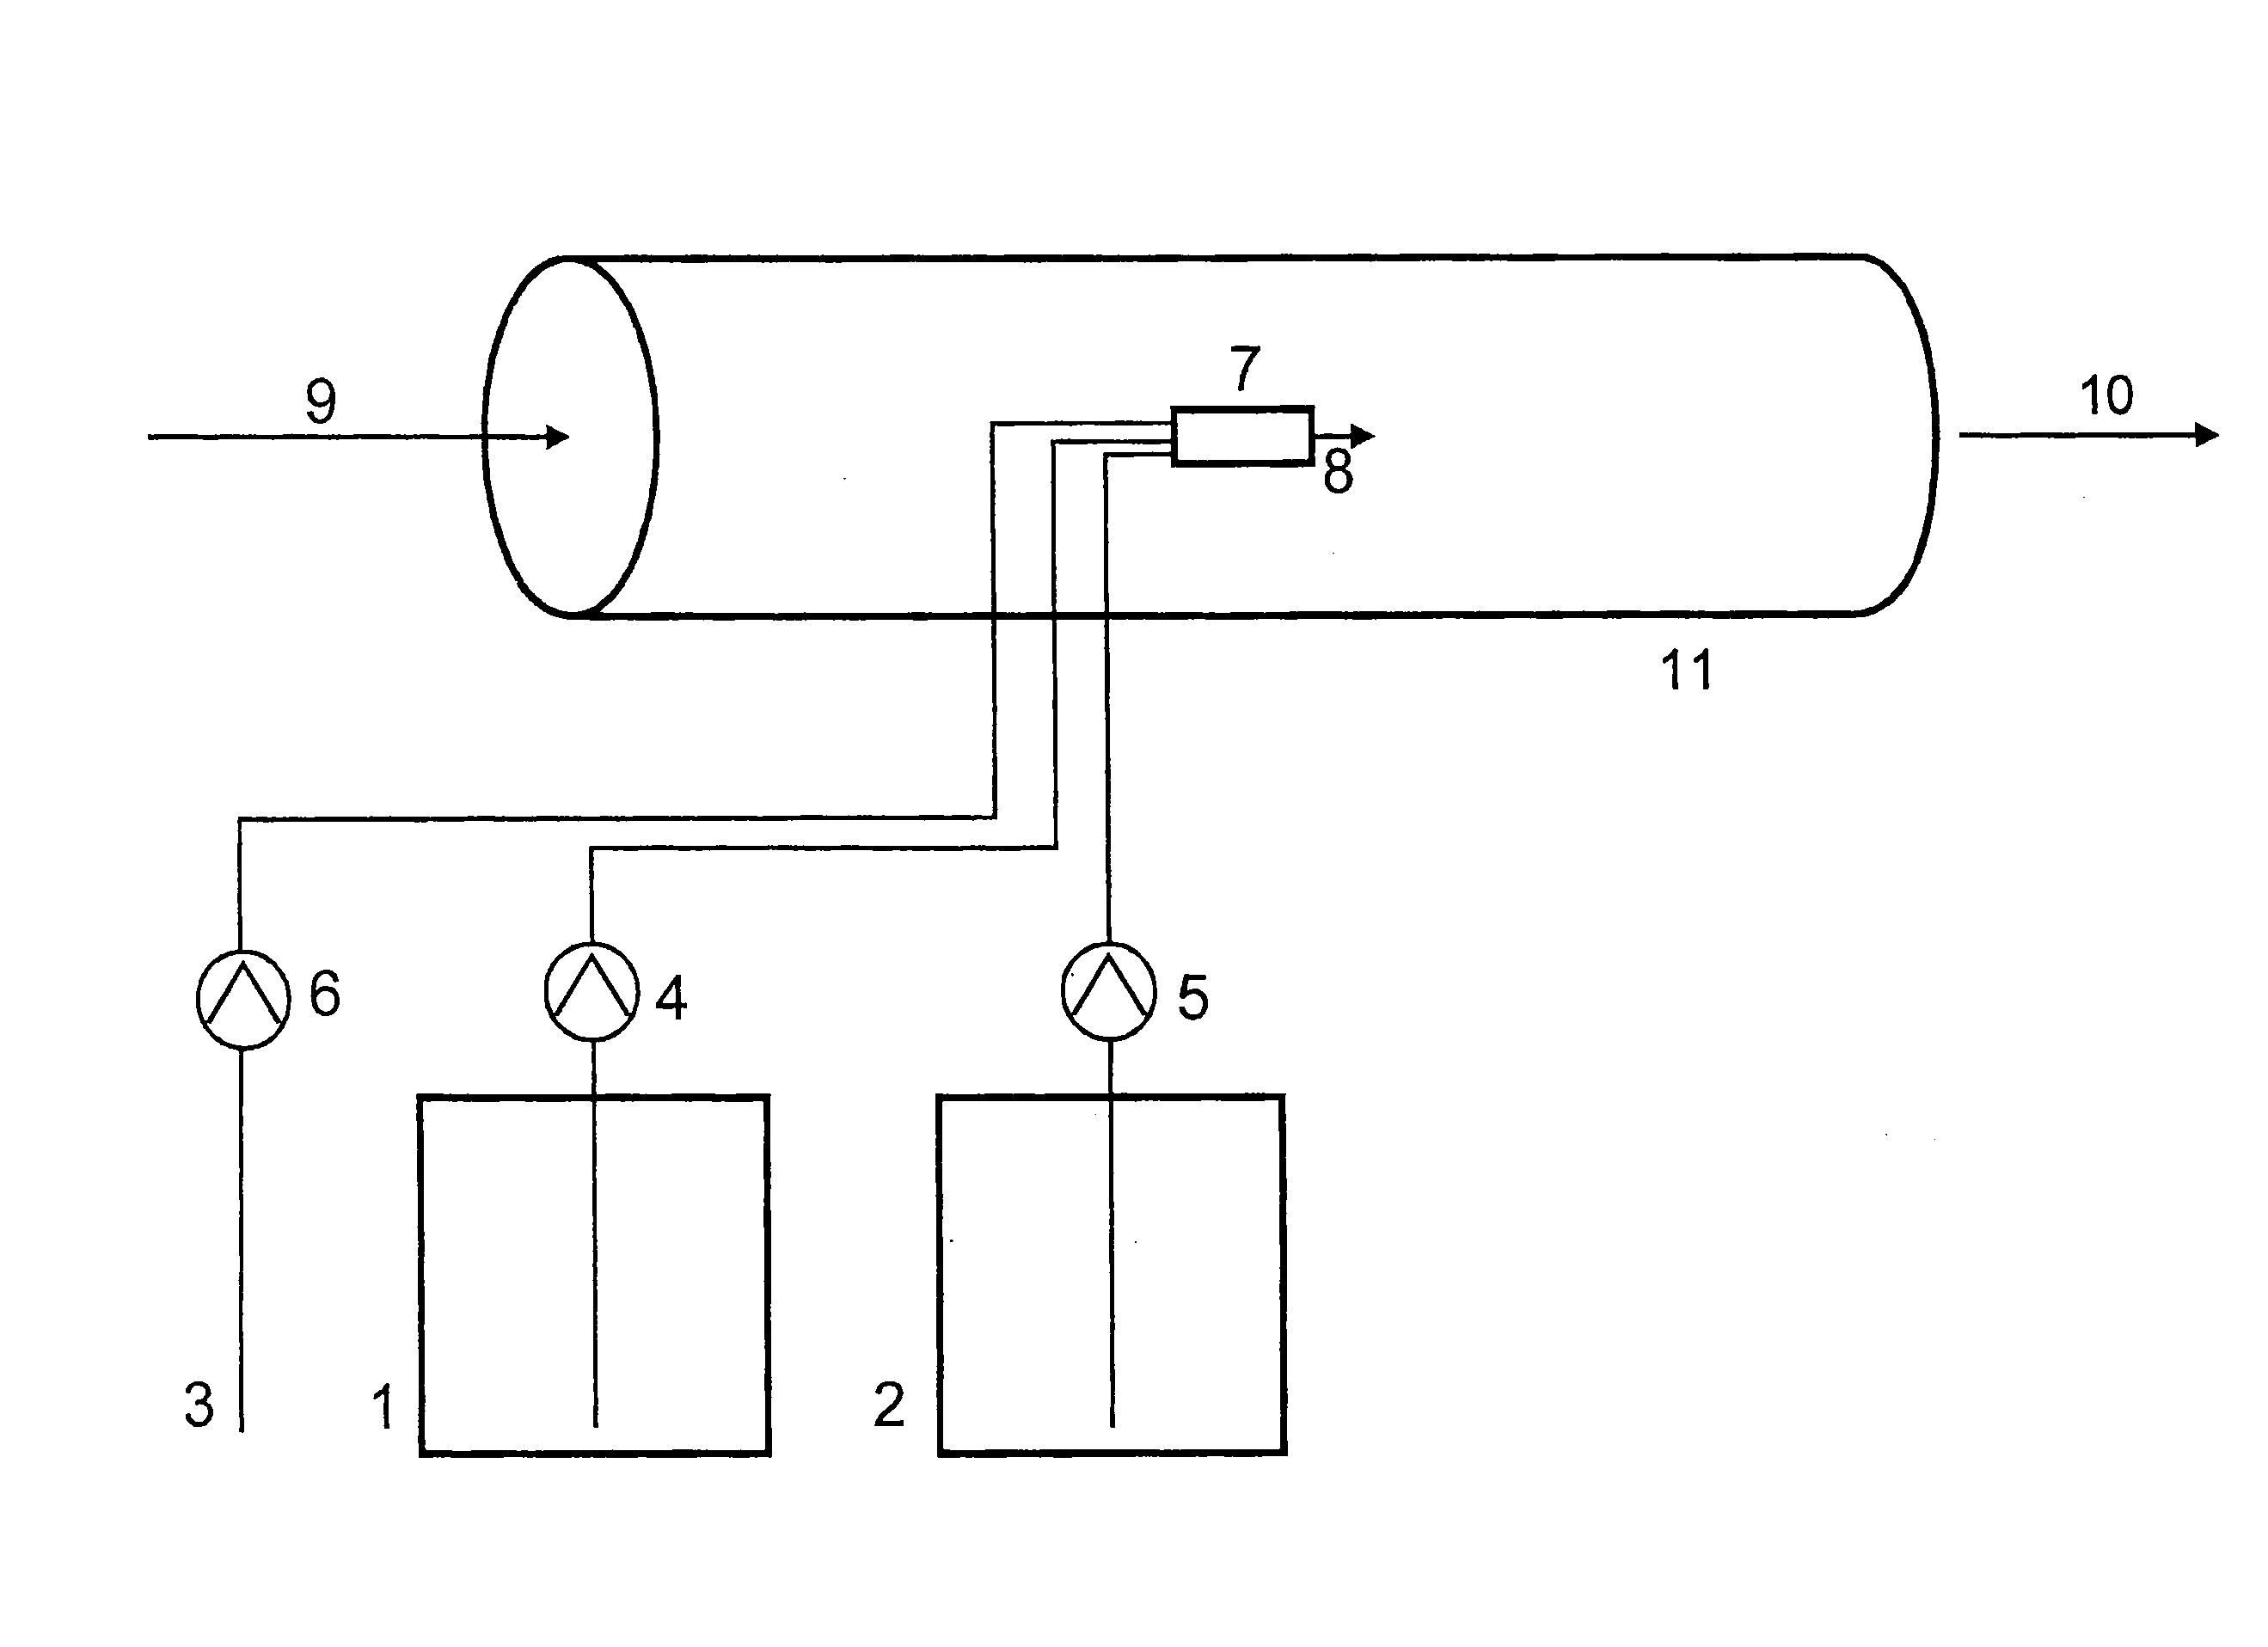 Method of treating water and aqueous systems in pipes with chlorine dioxide